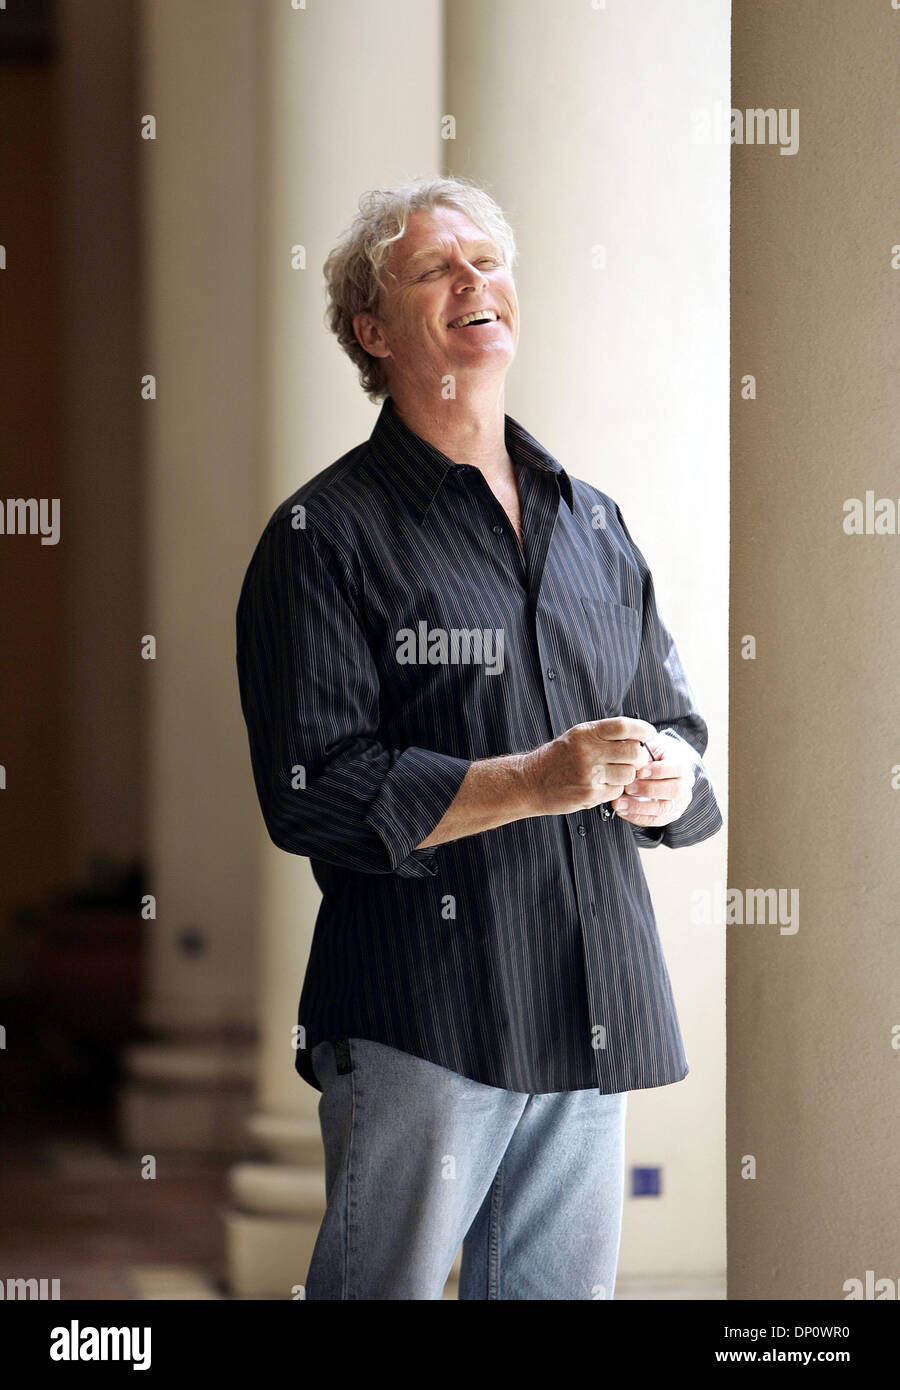 Apr 05, 2006; West Palm Beach, FL, USA; WILLIAM KATT, best known as TV's 'The Greatest American Hero,' is in town in rehearsals for 'What A night!' presented by the Palm Beach Shakespeare Festival.  Mandatory Credit: Photo by Richard Graulich/Palm Beach Post /ZUMA Press. (©) Copyright 2006 by Palm Beach Post Stock Photo